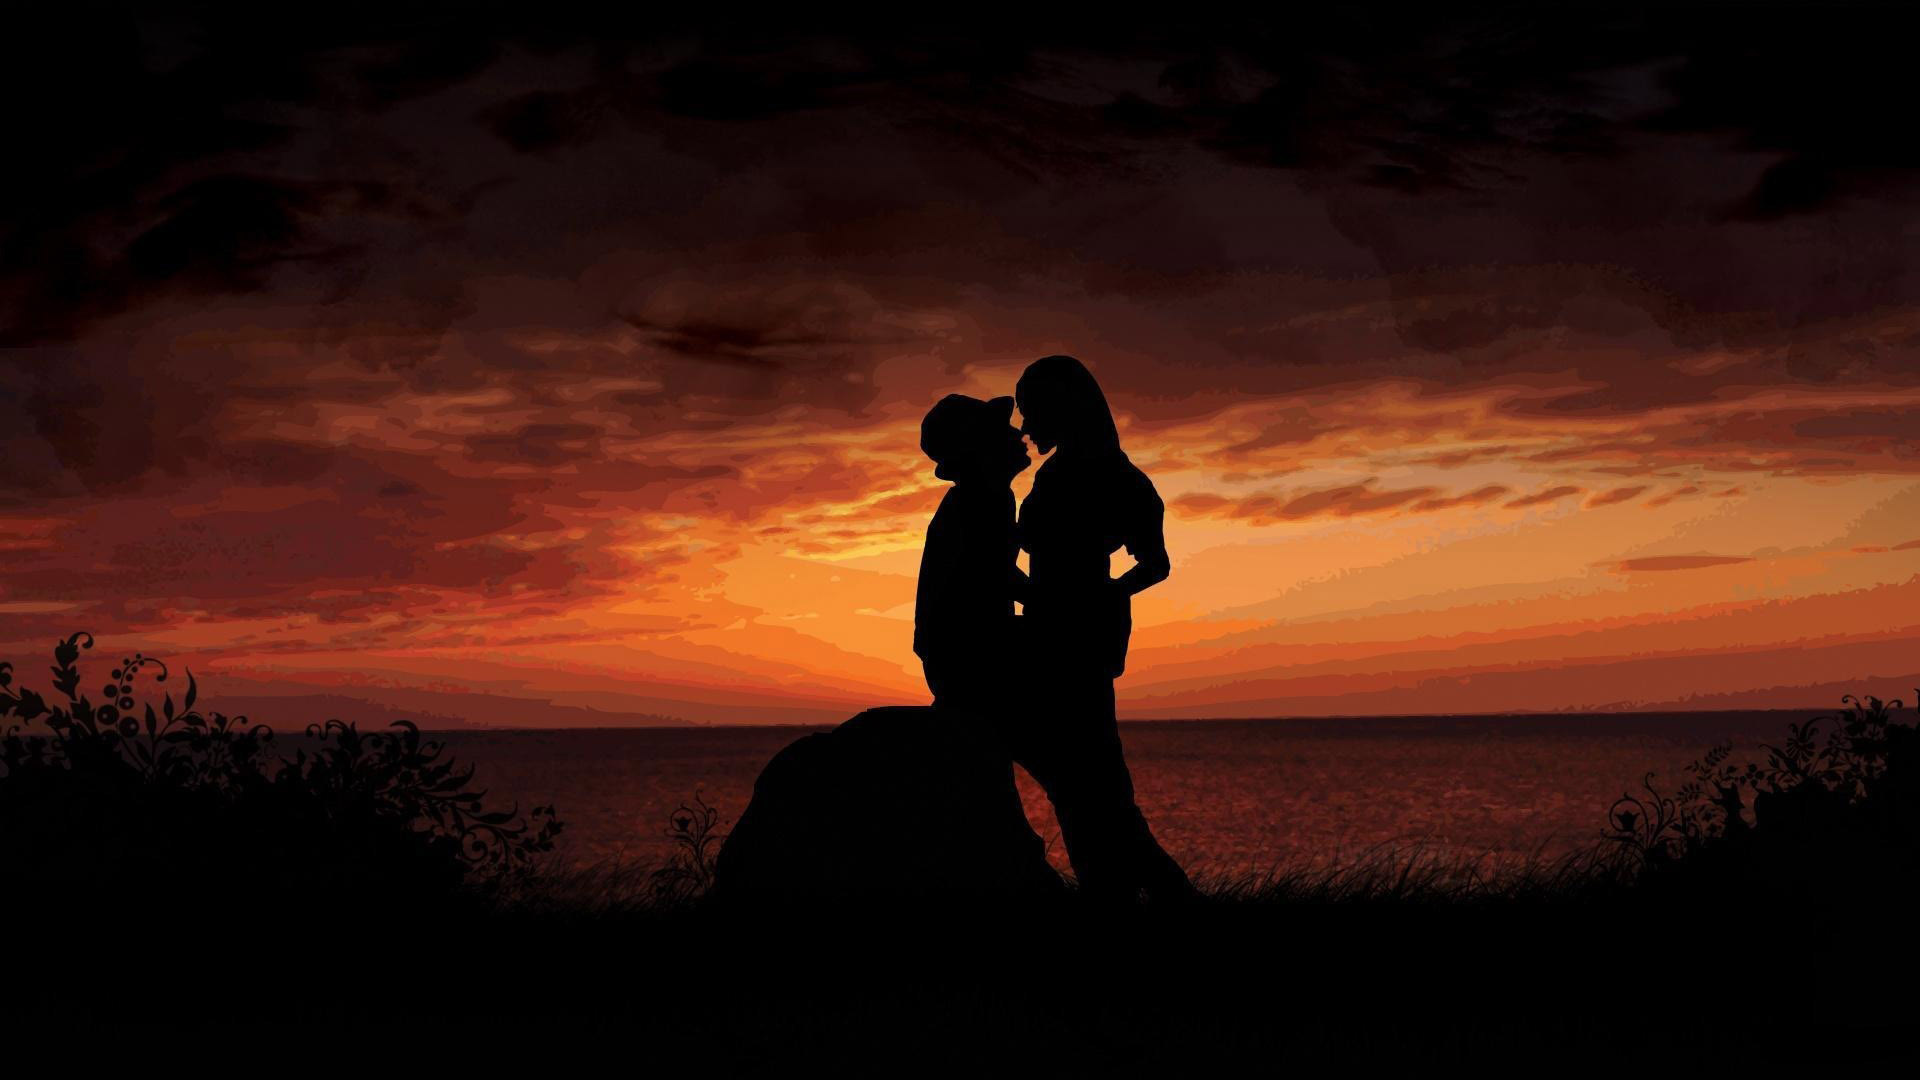 Free Backgrounds artistic, love, romantic